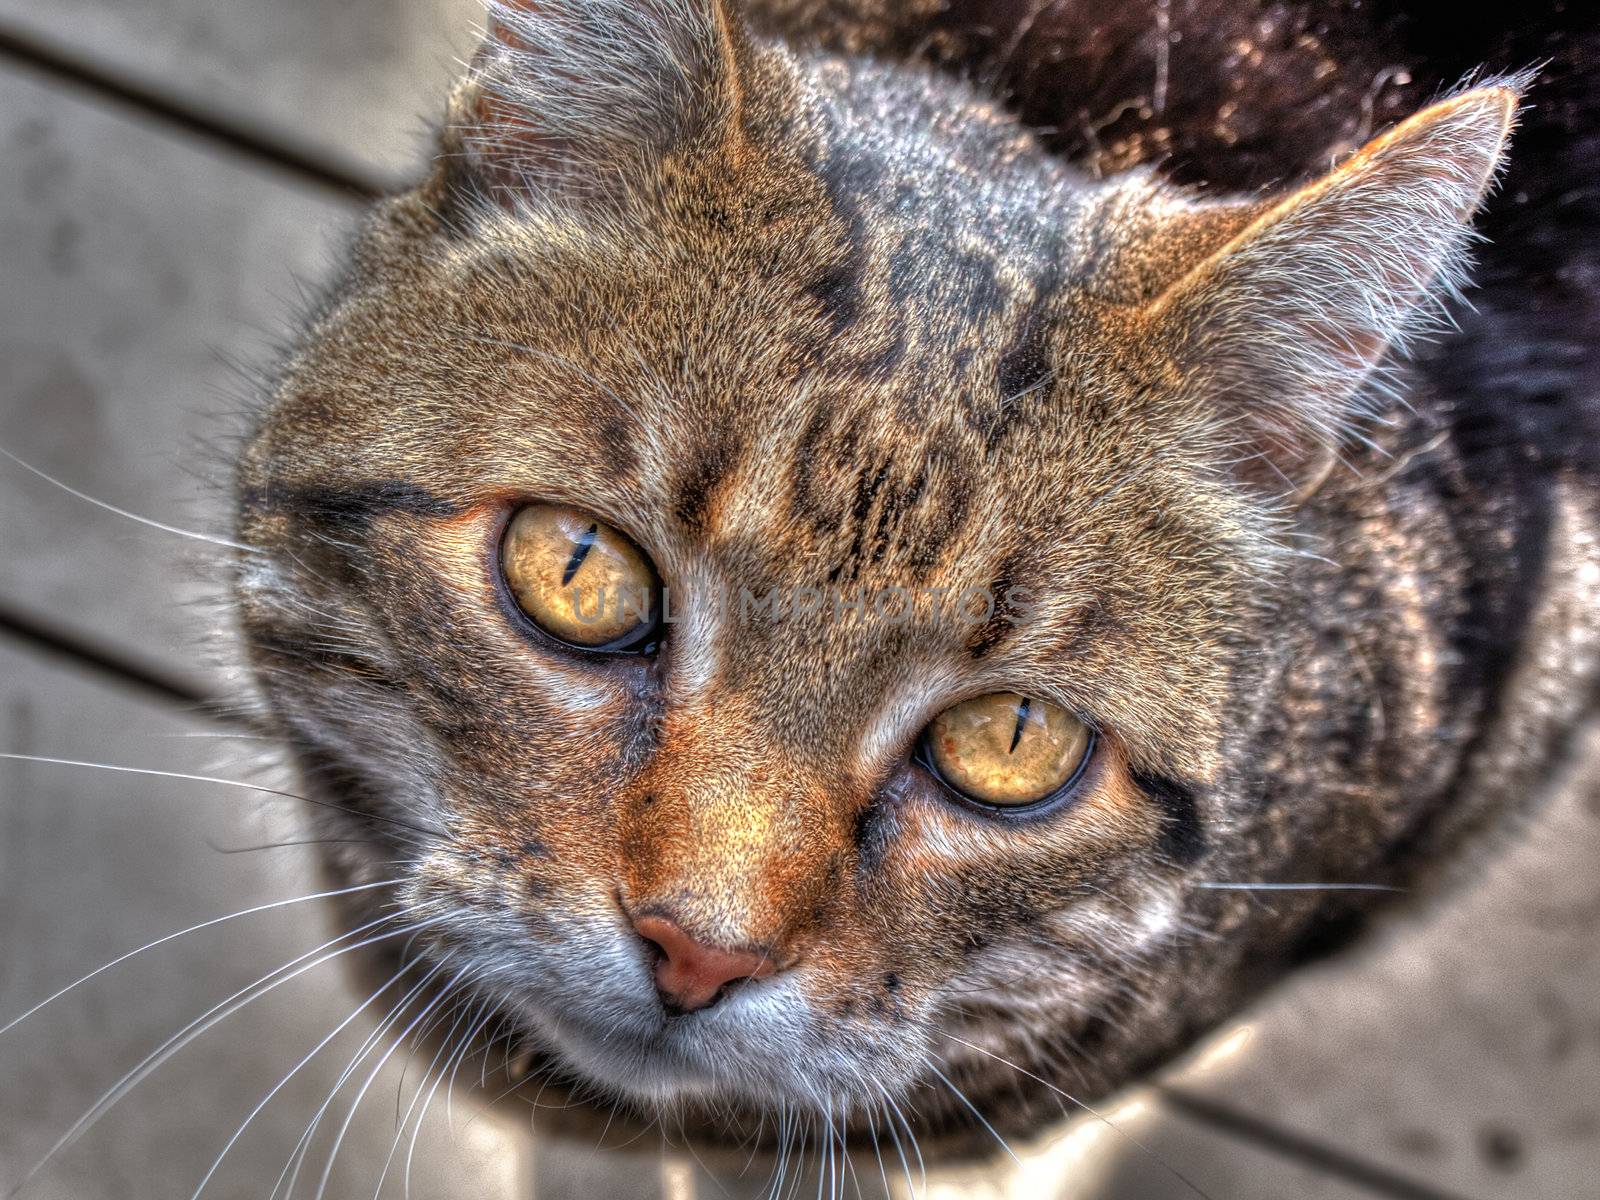 Up close shot of cat with piercing eyes processed as an HDR photo.